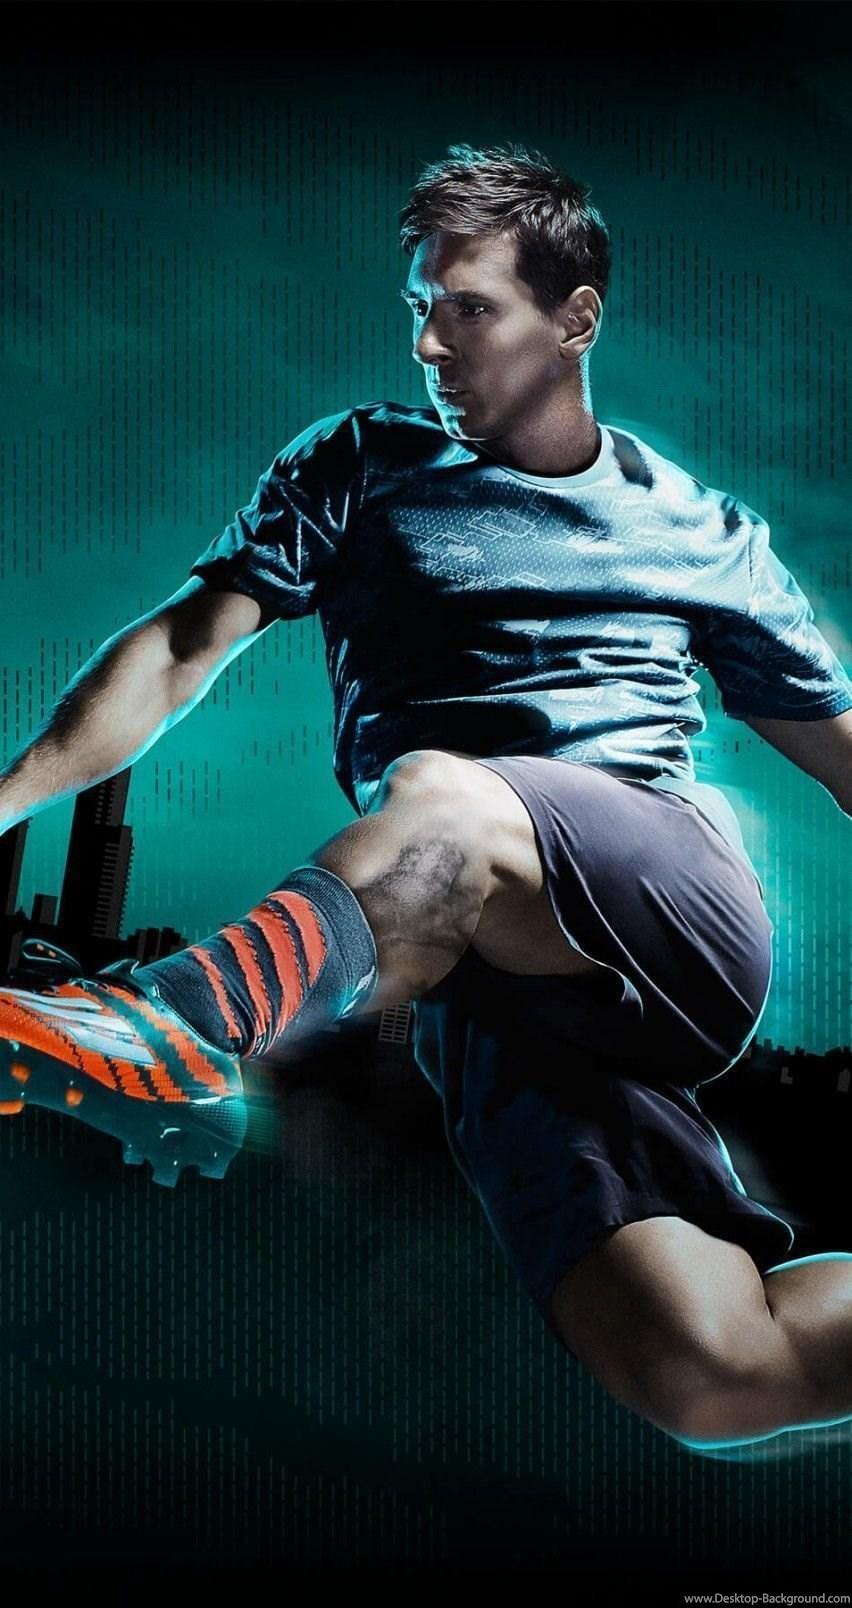 Download Lionel Messi Adidas Commercial HD Wallpaper For iPhone 6